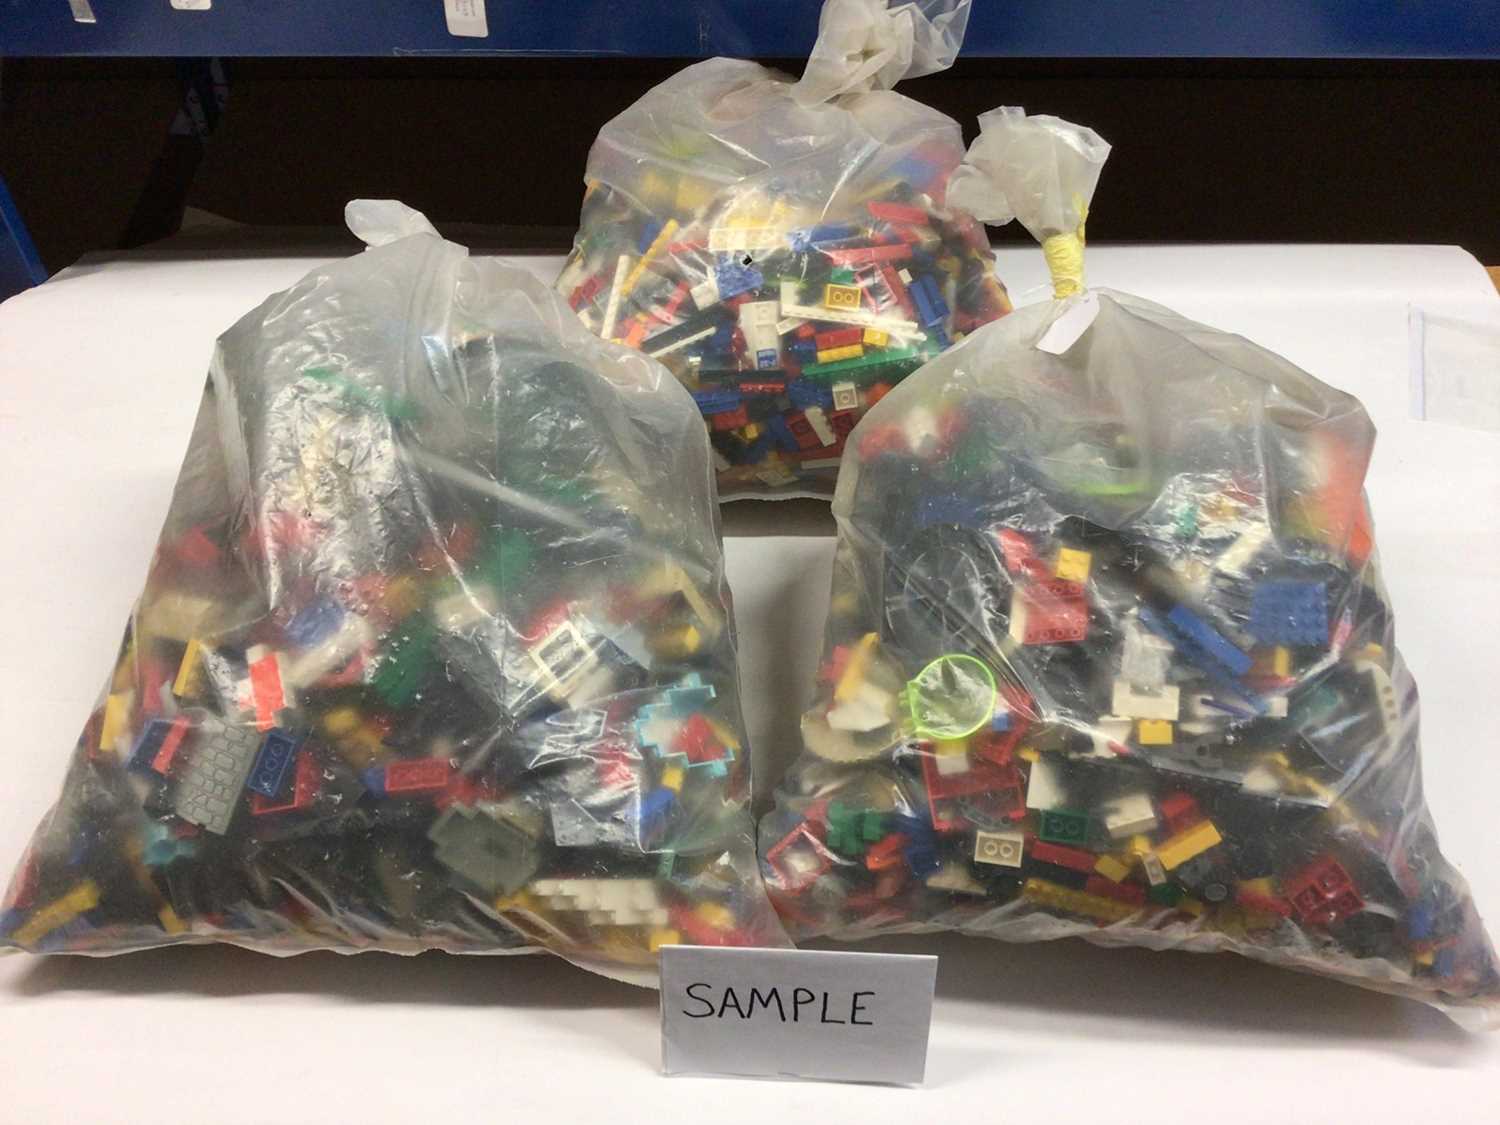 Lot 91 - Three bags of assorted mixed Lego bricks and accessories, weighing approx 15 Kg in total